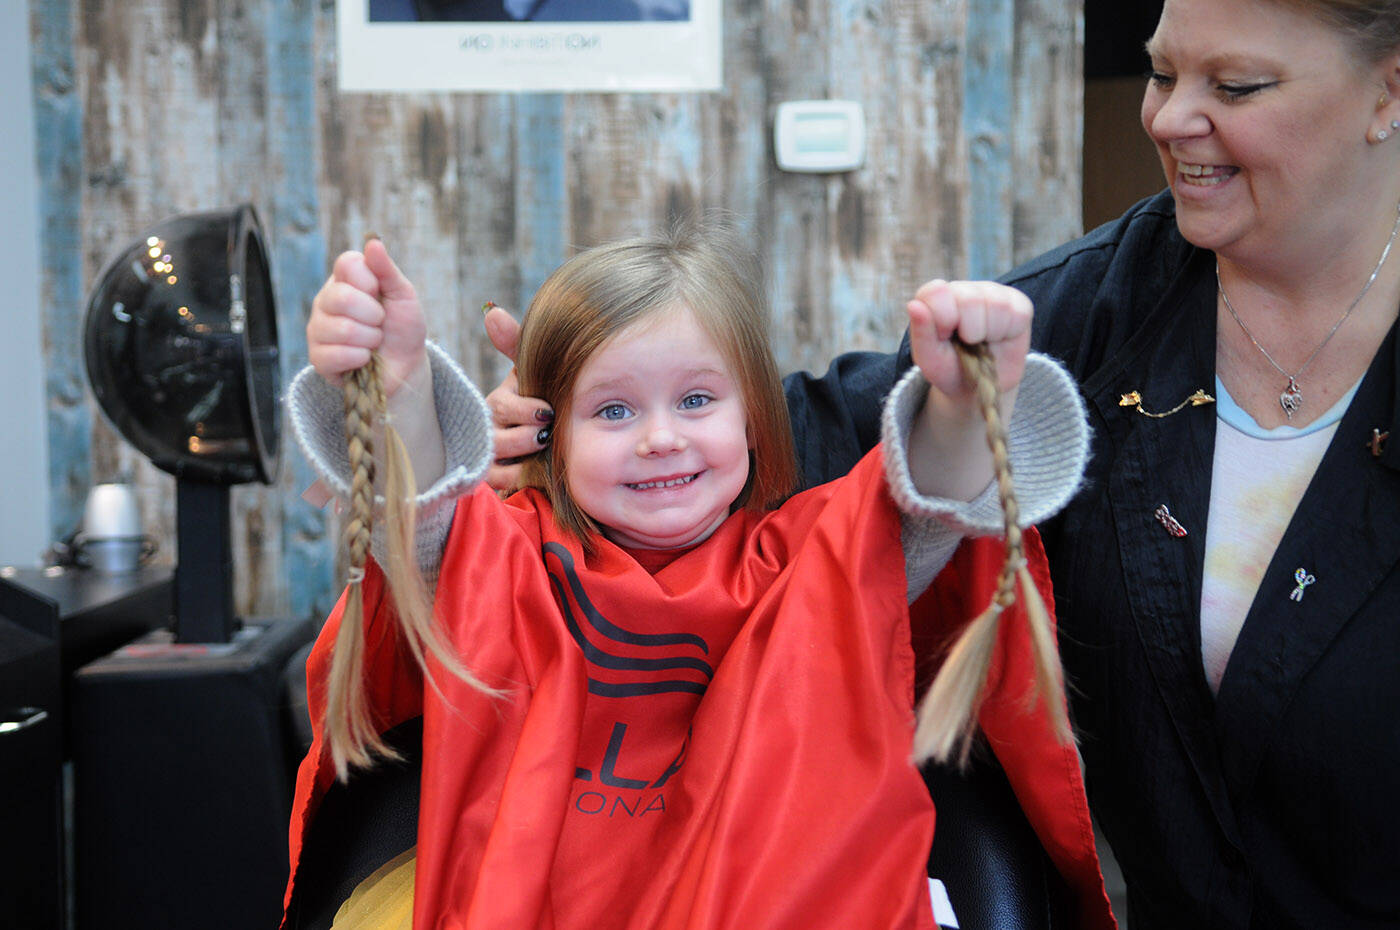 Kairi Ketler, 3, poses for a photo beside hairdresser Brenda Miller after her first haircut at Sassy Cuts on Friday, Dec. 16, 2022. Kairi is donating her 12-inch ponytails to be made into wigs for kids, and is also fundraising for charity. (Jenna Hauck/ Chilliwack Progess)